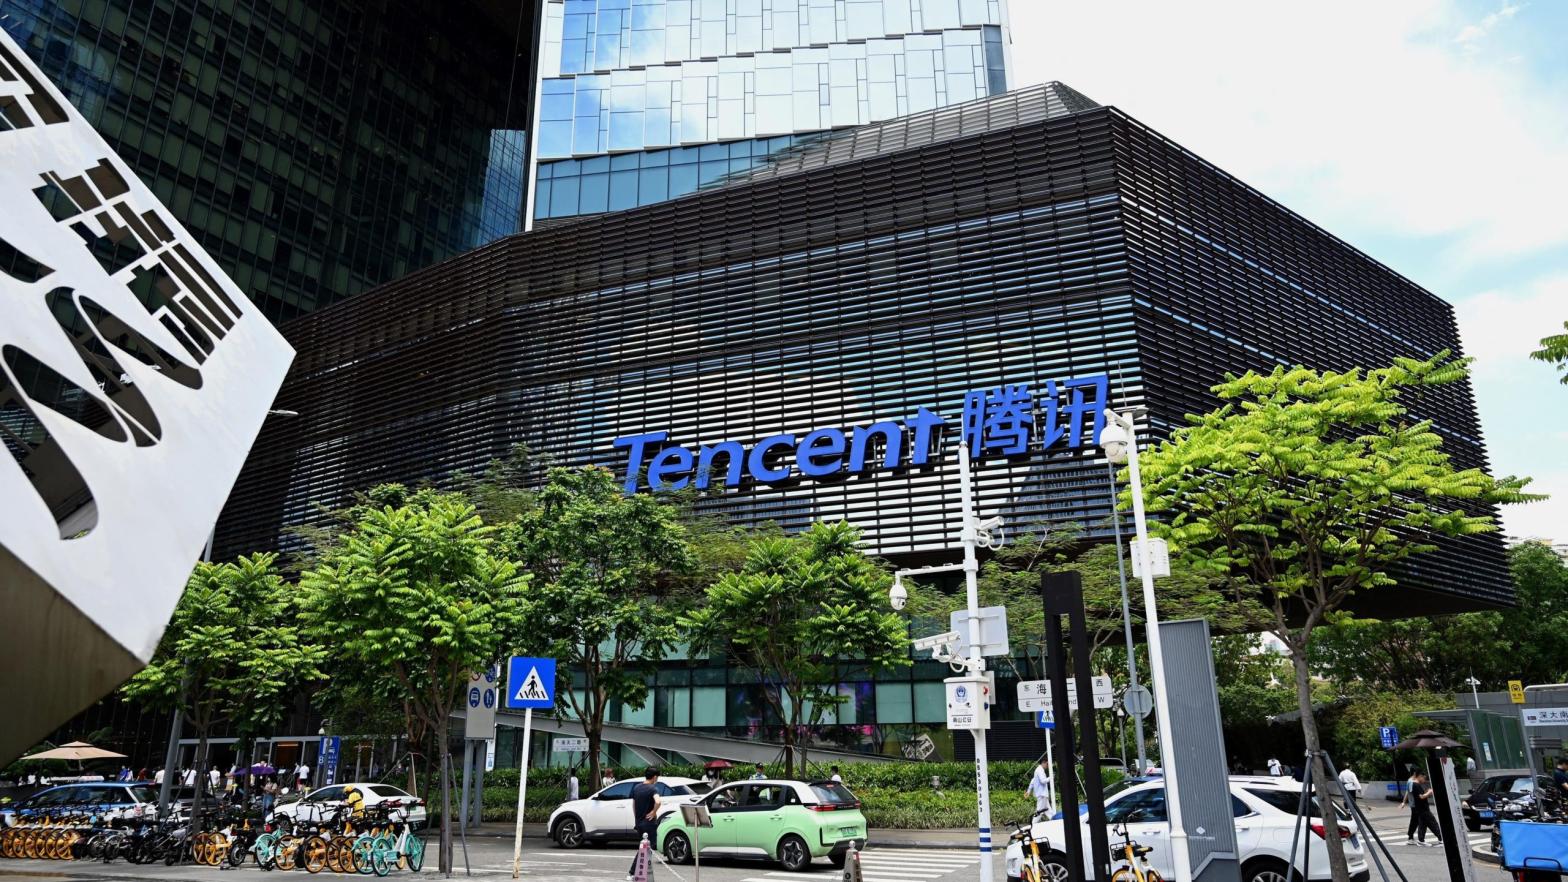 Tencent's headquarters in Shenzhen, China, in Guangdong province, seen here in May 2021. (Photo: Noel Celis / AFP, Getty Images)